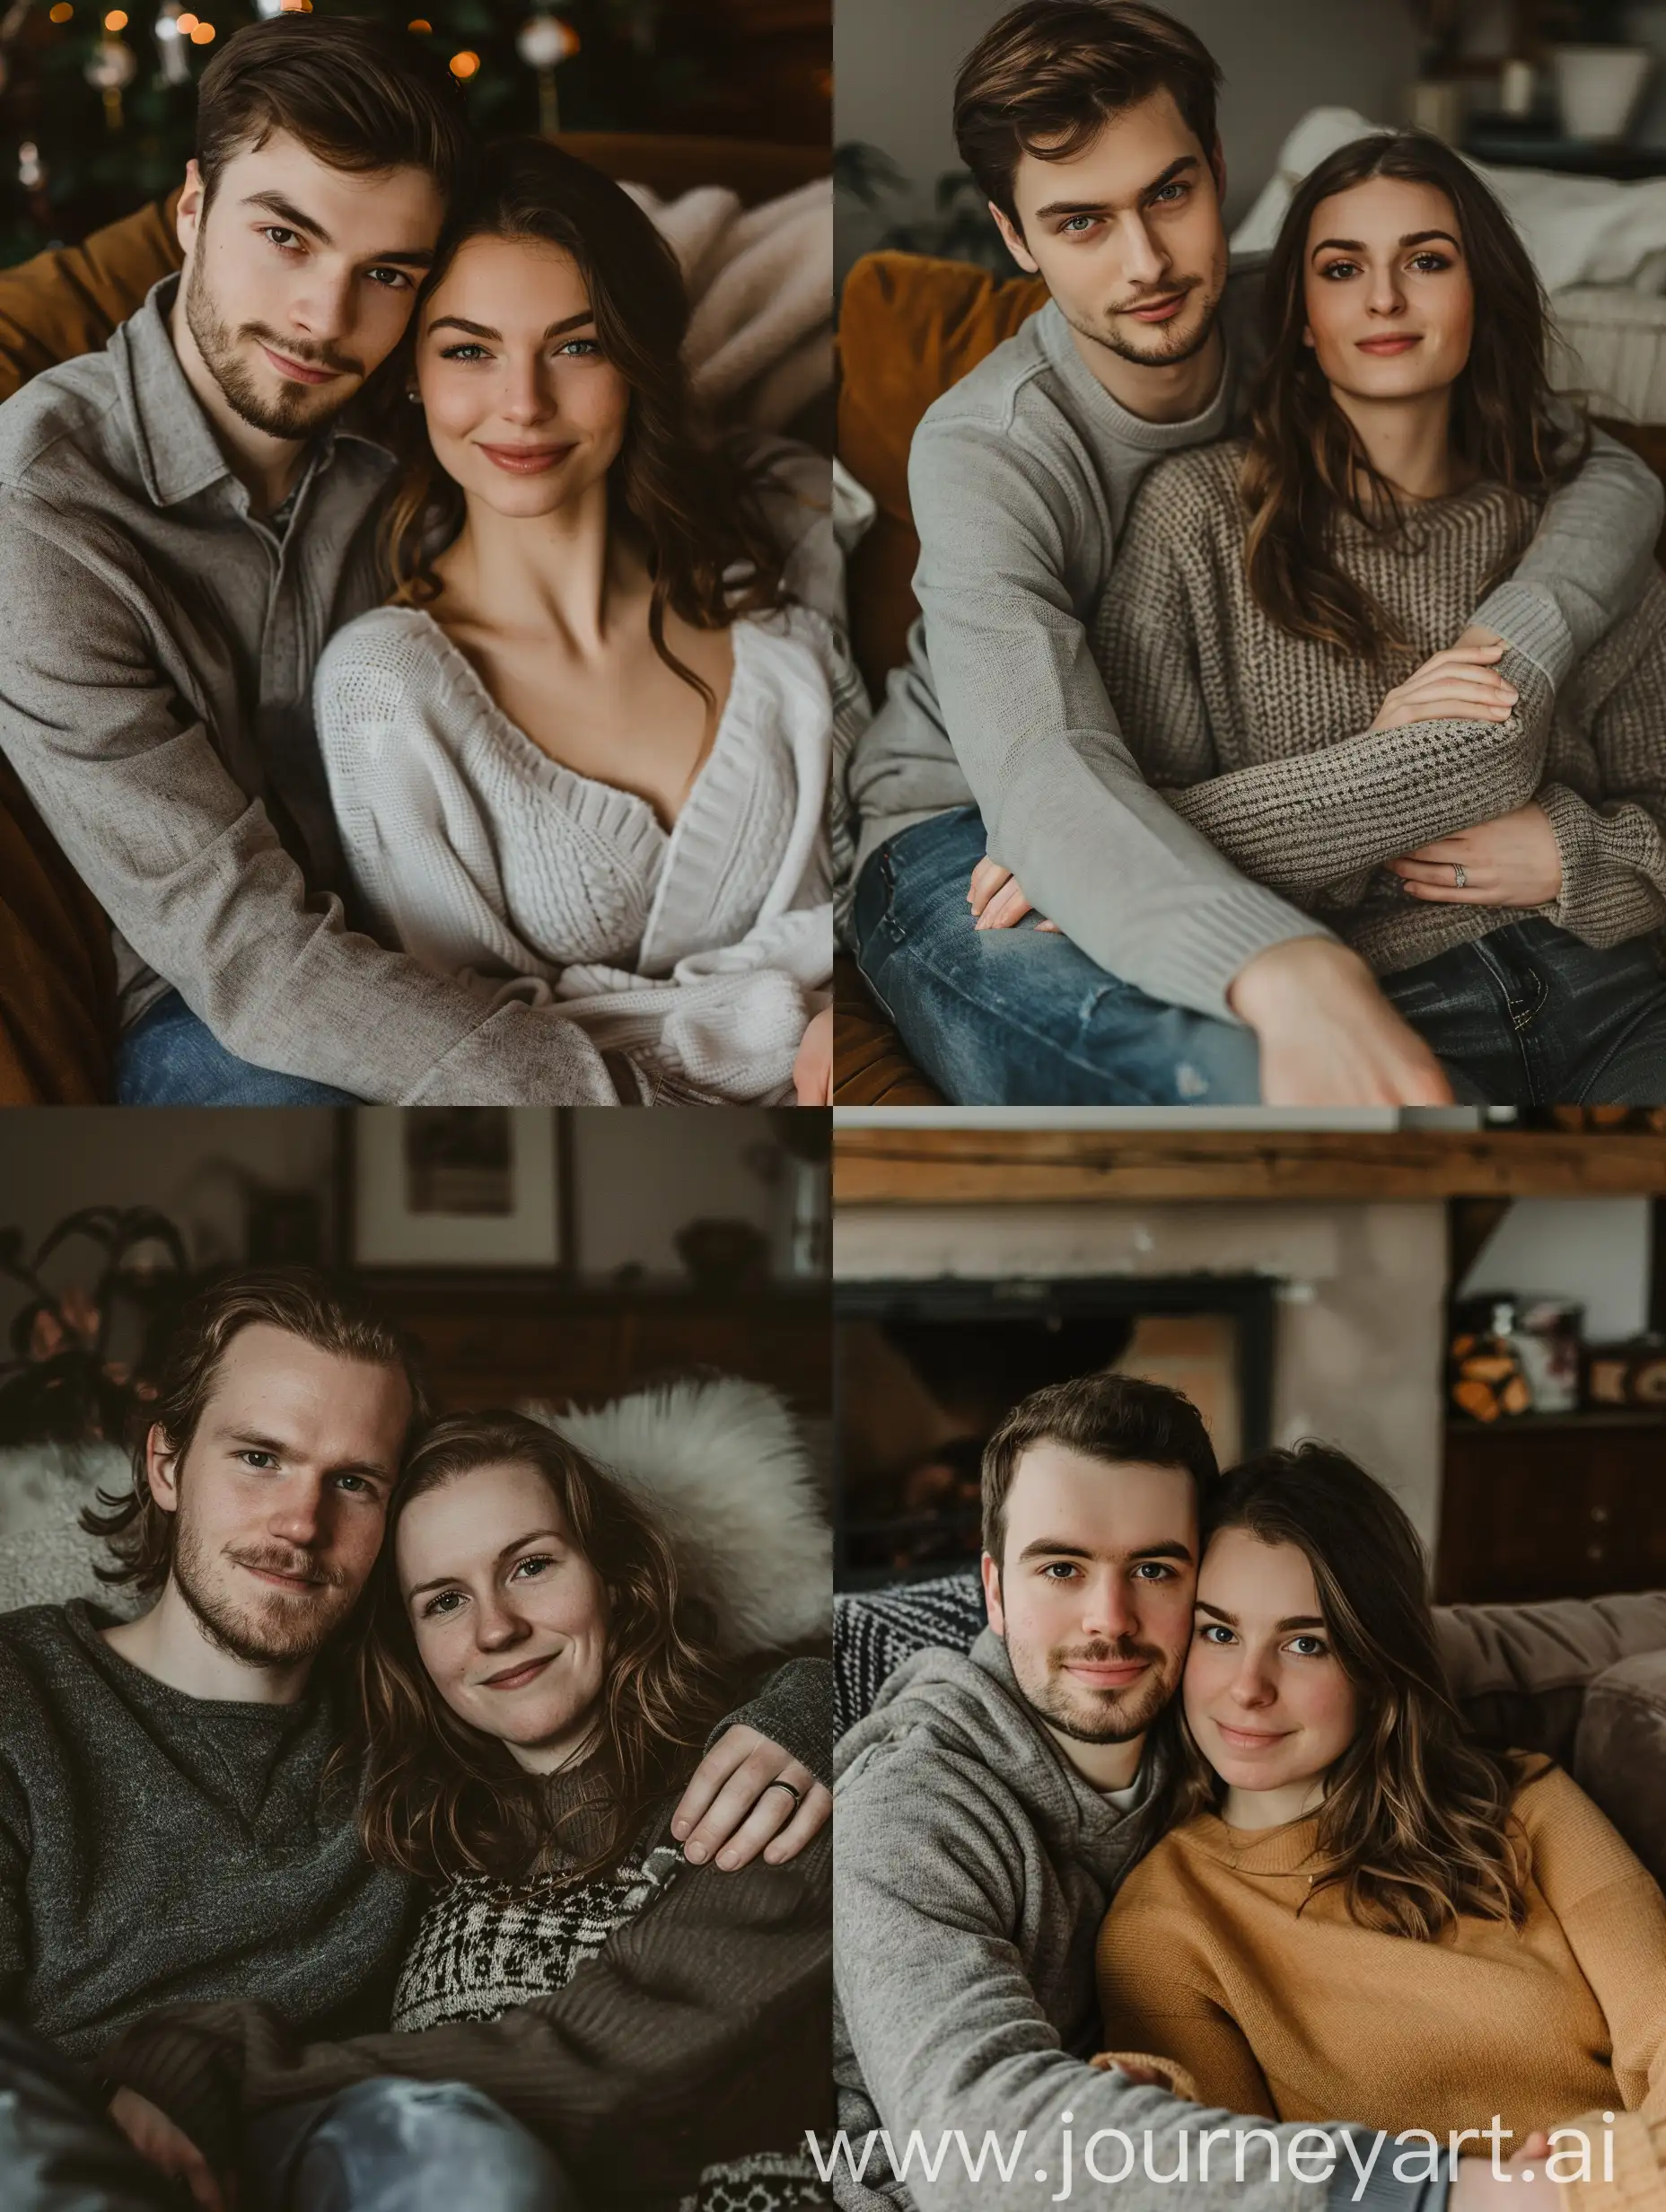 Loving couple sitting on a sofa in a cozy setting faces clearly visible and looking at the camera natural pose realistic photo faces relaxed with a slight smile 